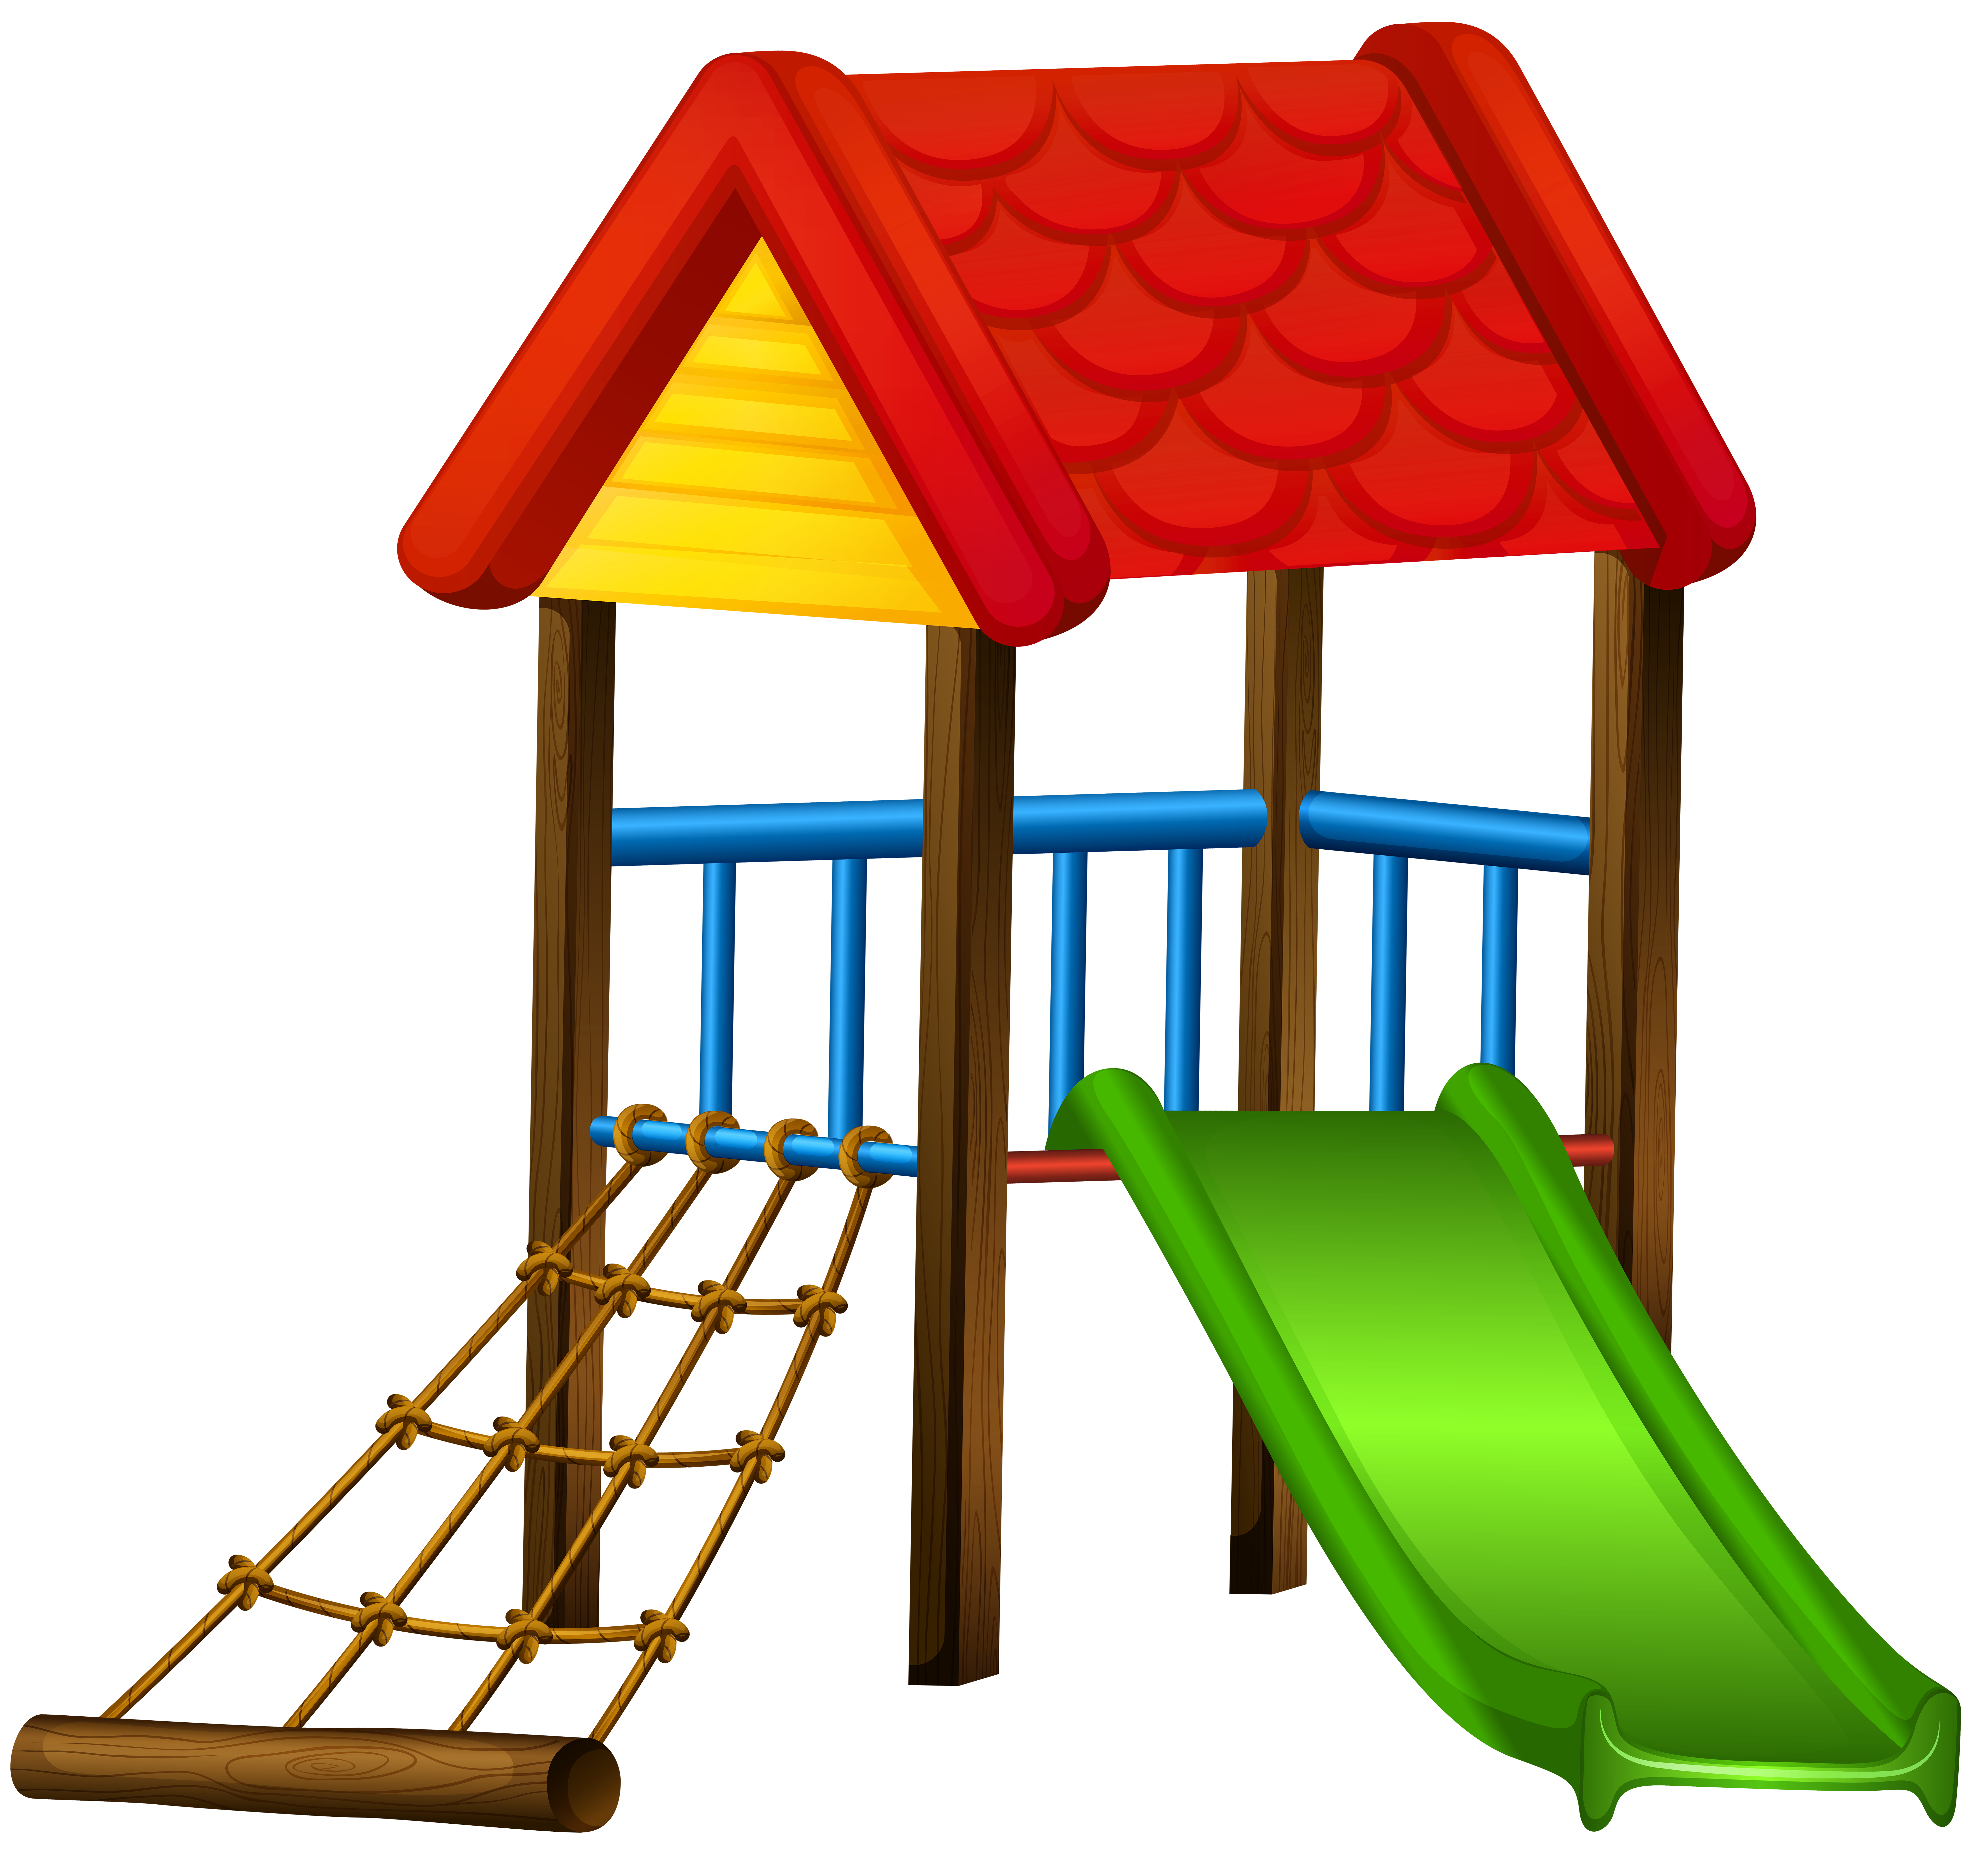 Grass clipart playground. Slide with roof png